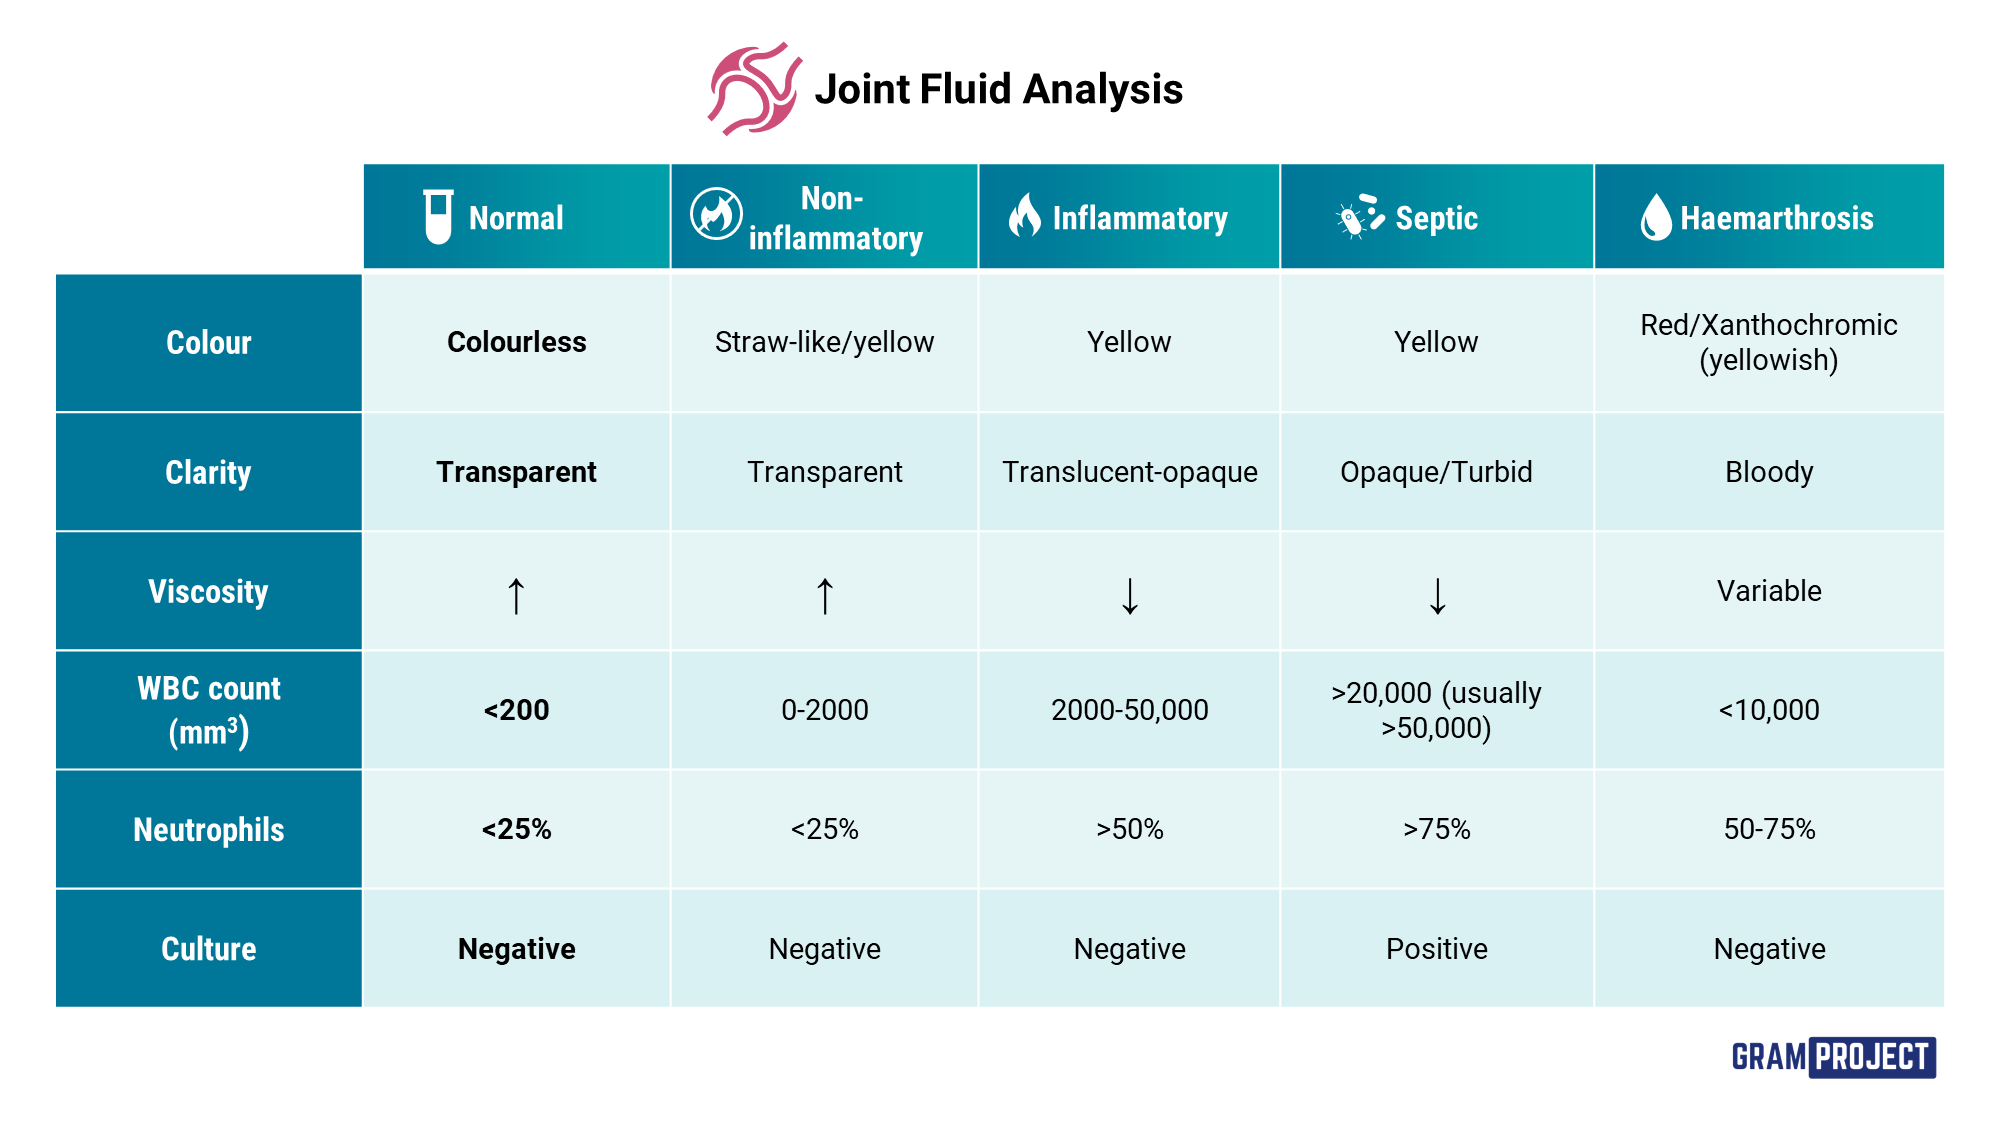 Joint fluid analysis table and comparison along with causes of abnormal results.